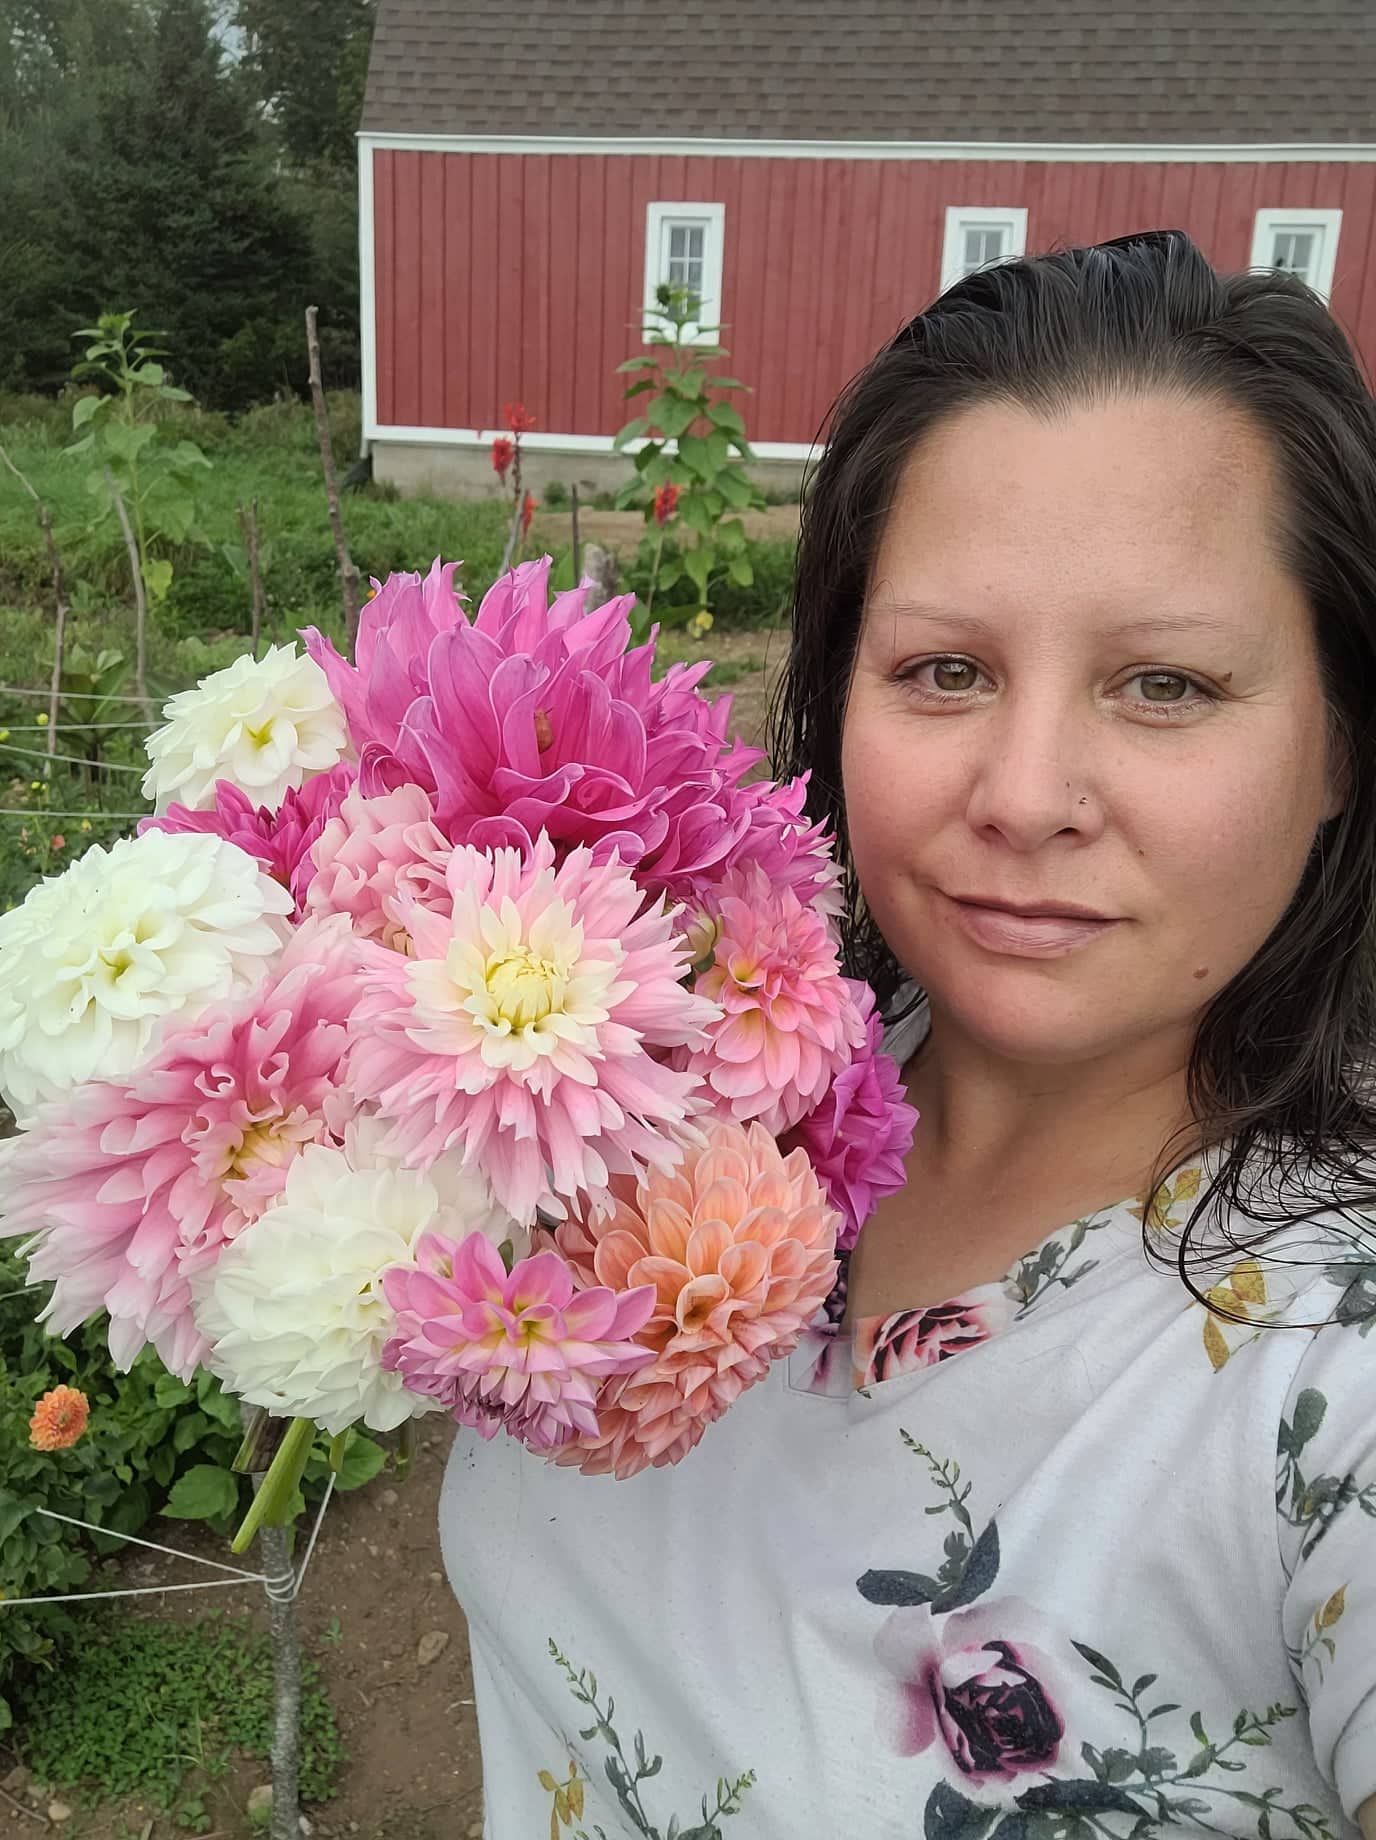 Kari Rouse with pink and white bouquet of dahlias